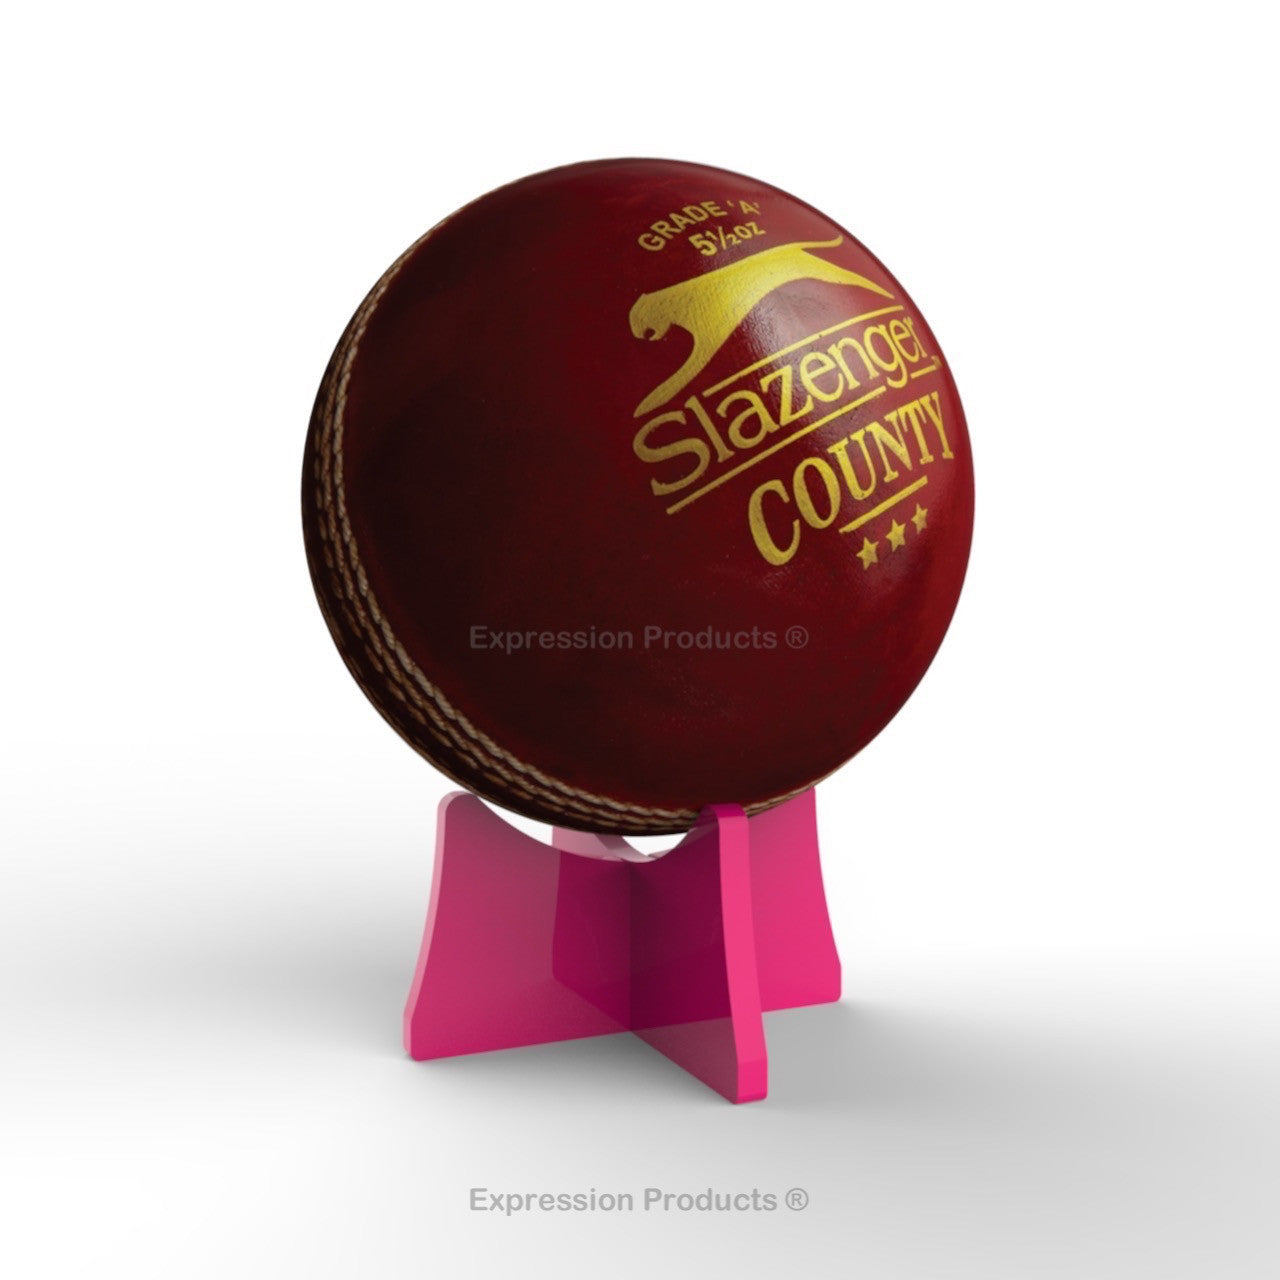 Cricket Ball Display Stand - Expression Products Ltd